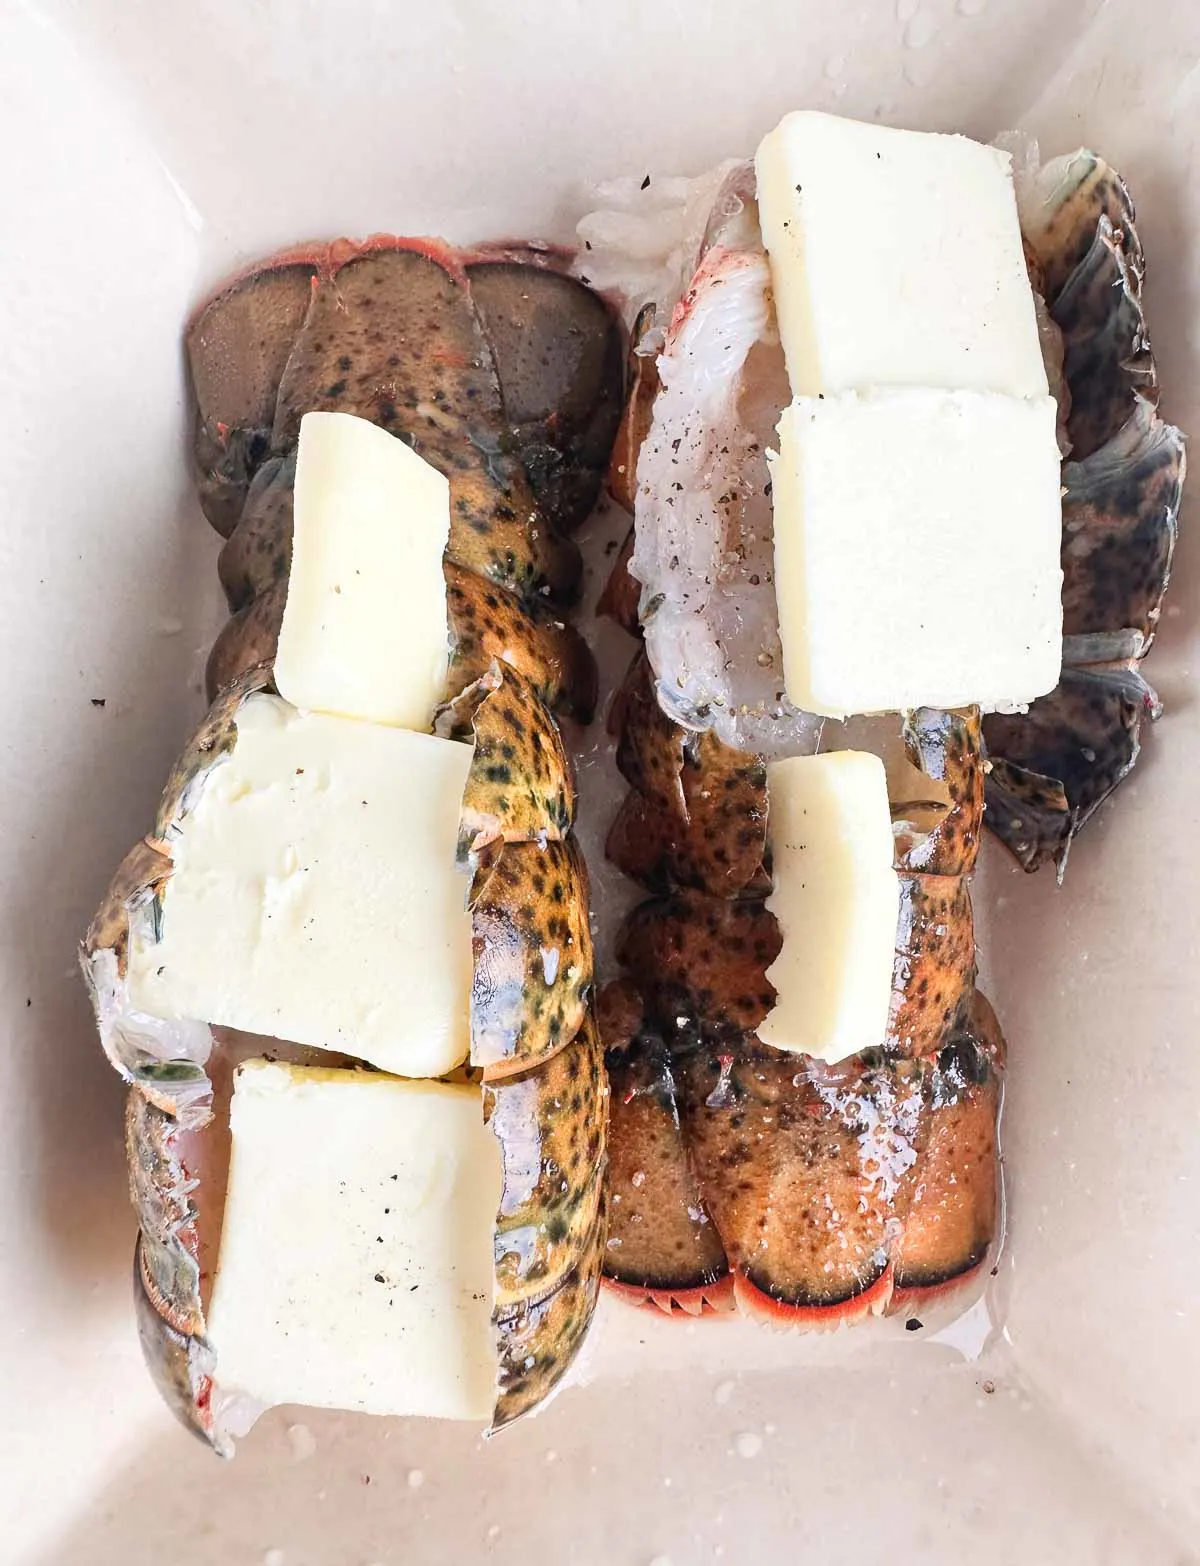 Cover the uncooked lobster meat with pats of butter before roasting it.